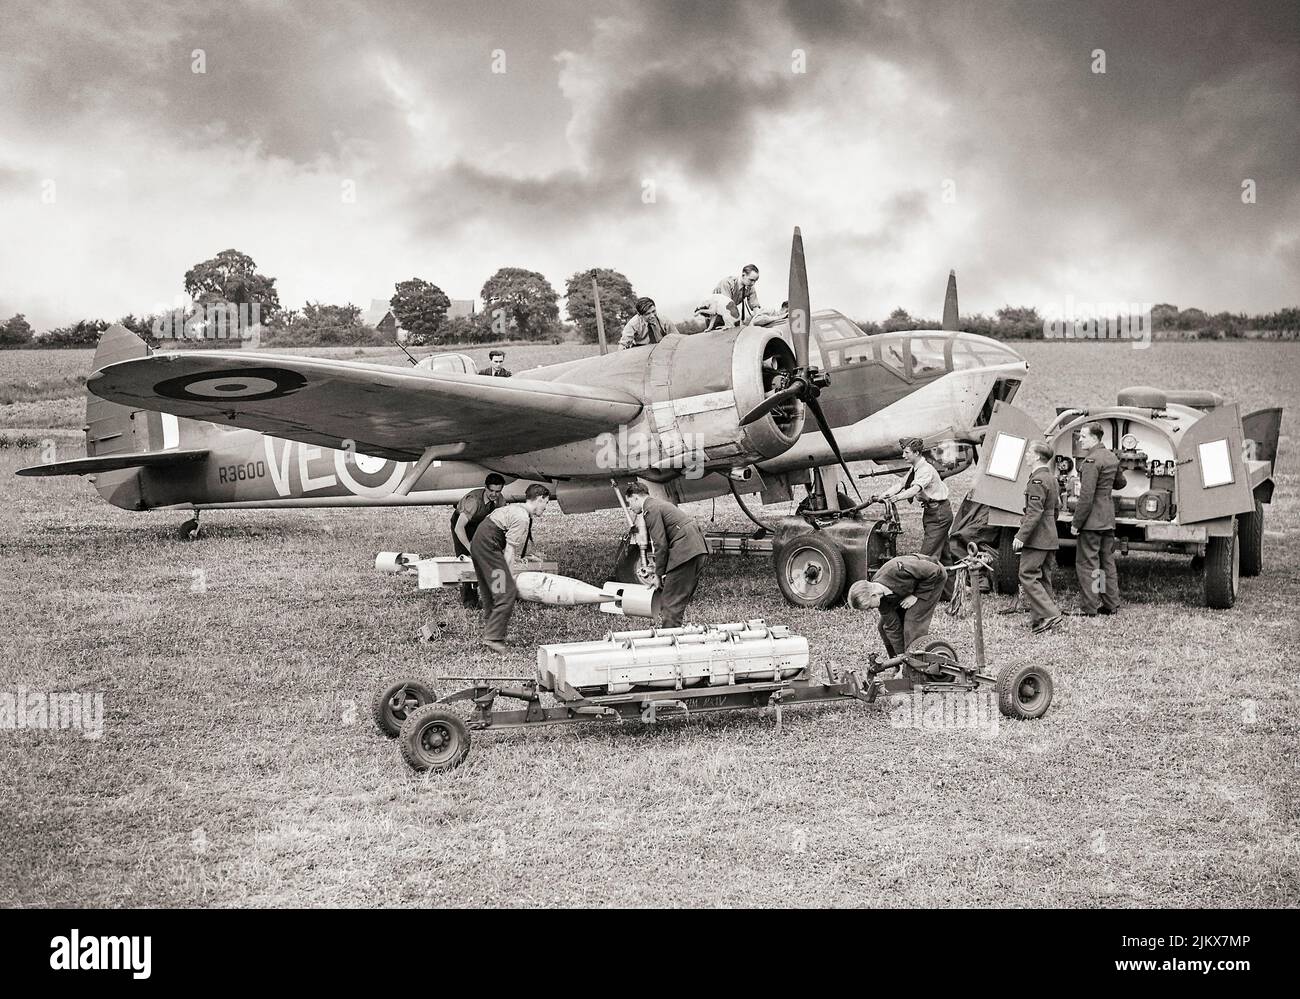 A Bristol Blenheim Mark IV, of No. 110 Squadron RAF, undergoes elaborate servicing at RAF Wattisham, Suffolk, England. Armourers unload 250-lb GP bombs and Small Bomb Containers (SBCs) of incendiaries from a trolley, while other groundcrew refuel the aircraft and attend to the engines, the cockpit and the gun-turret. Note the pet dog on the engine cowling. Stock Photo